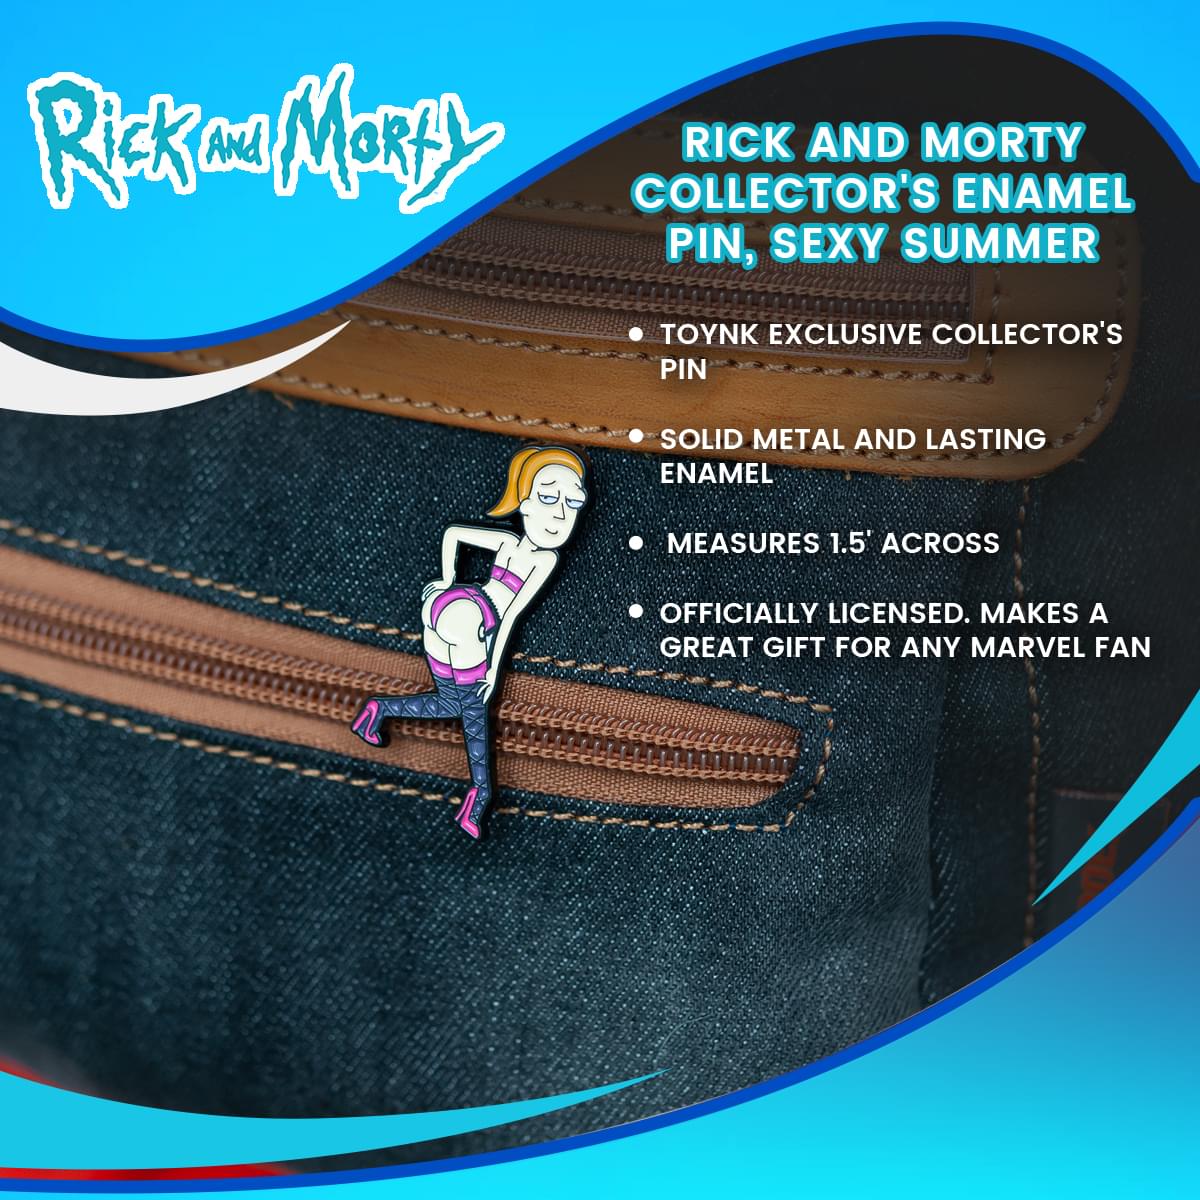 Rick and Morty Collector's Enamel Pin, Sexy Summer